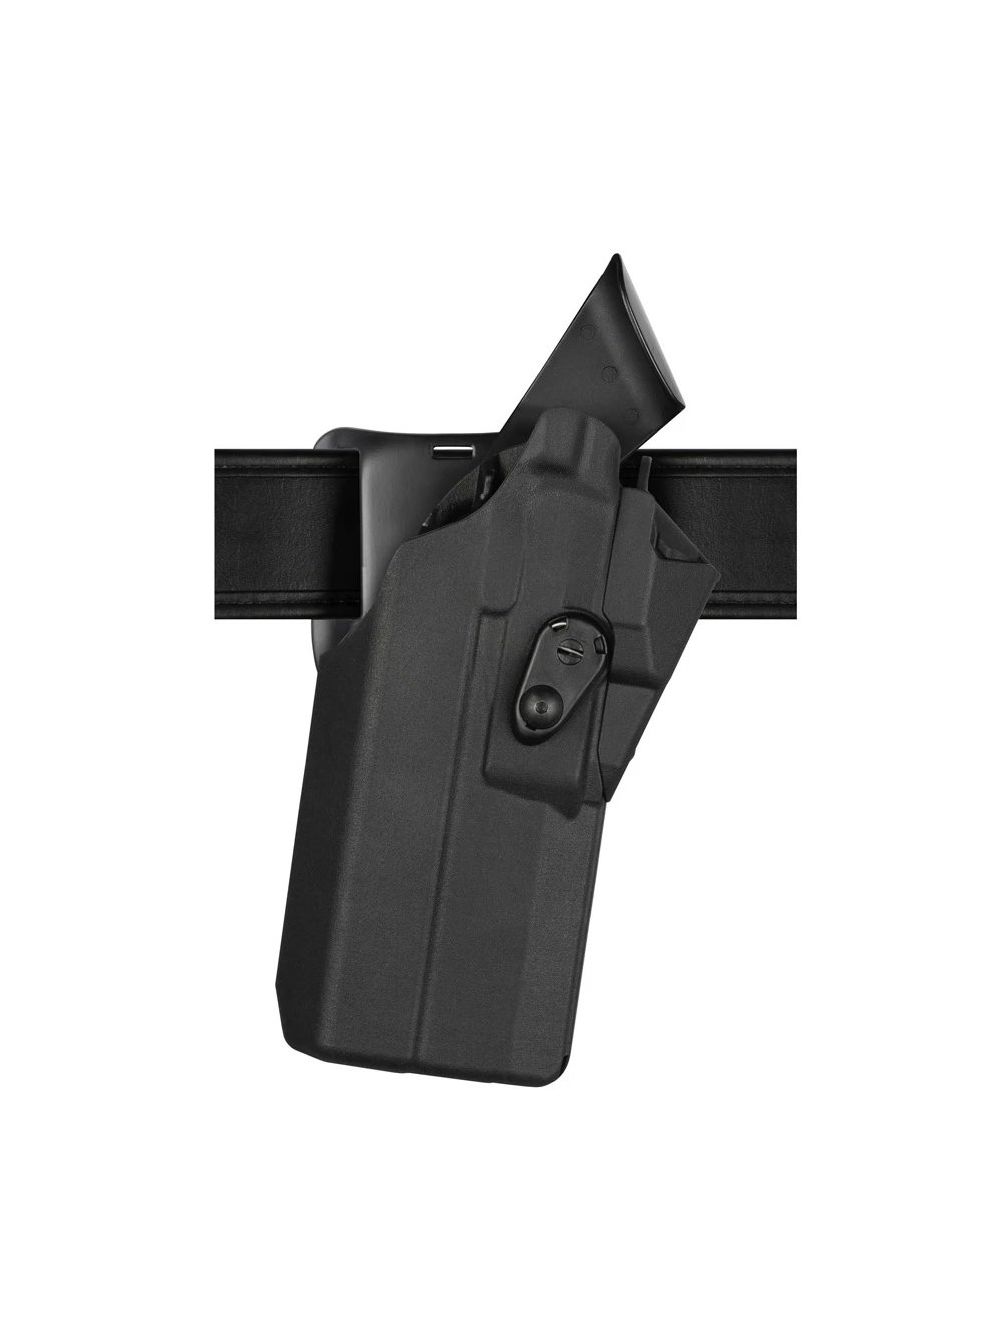 Model 7390RDS 7TS ALS Mid Ride Duty Holster for Glock 17 w/ Compact Light